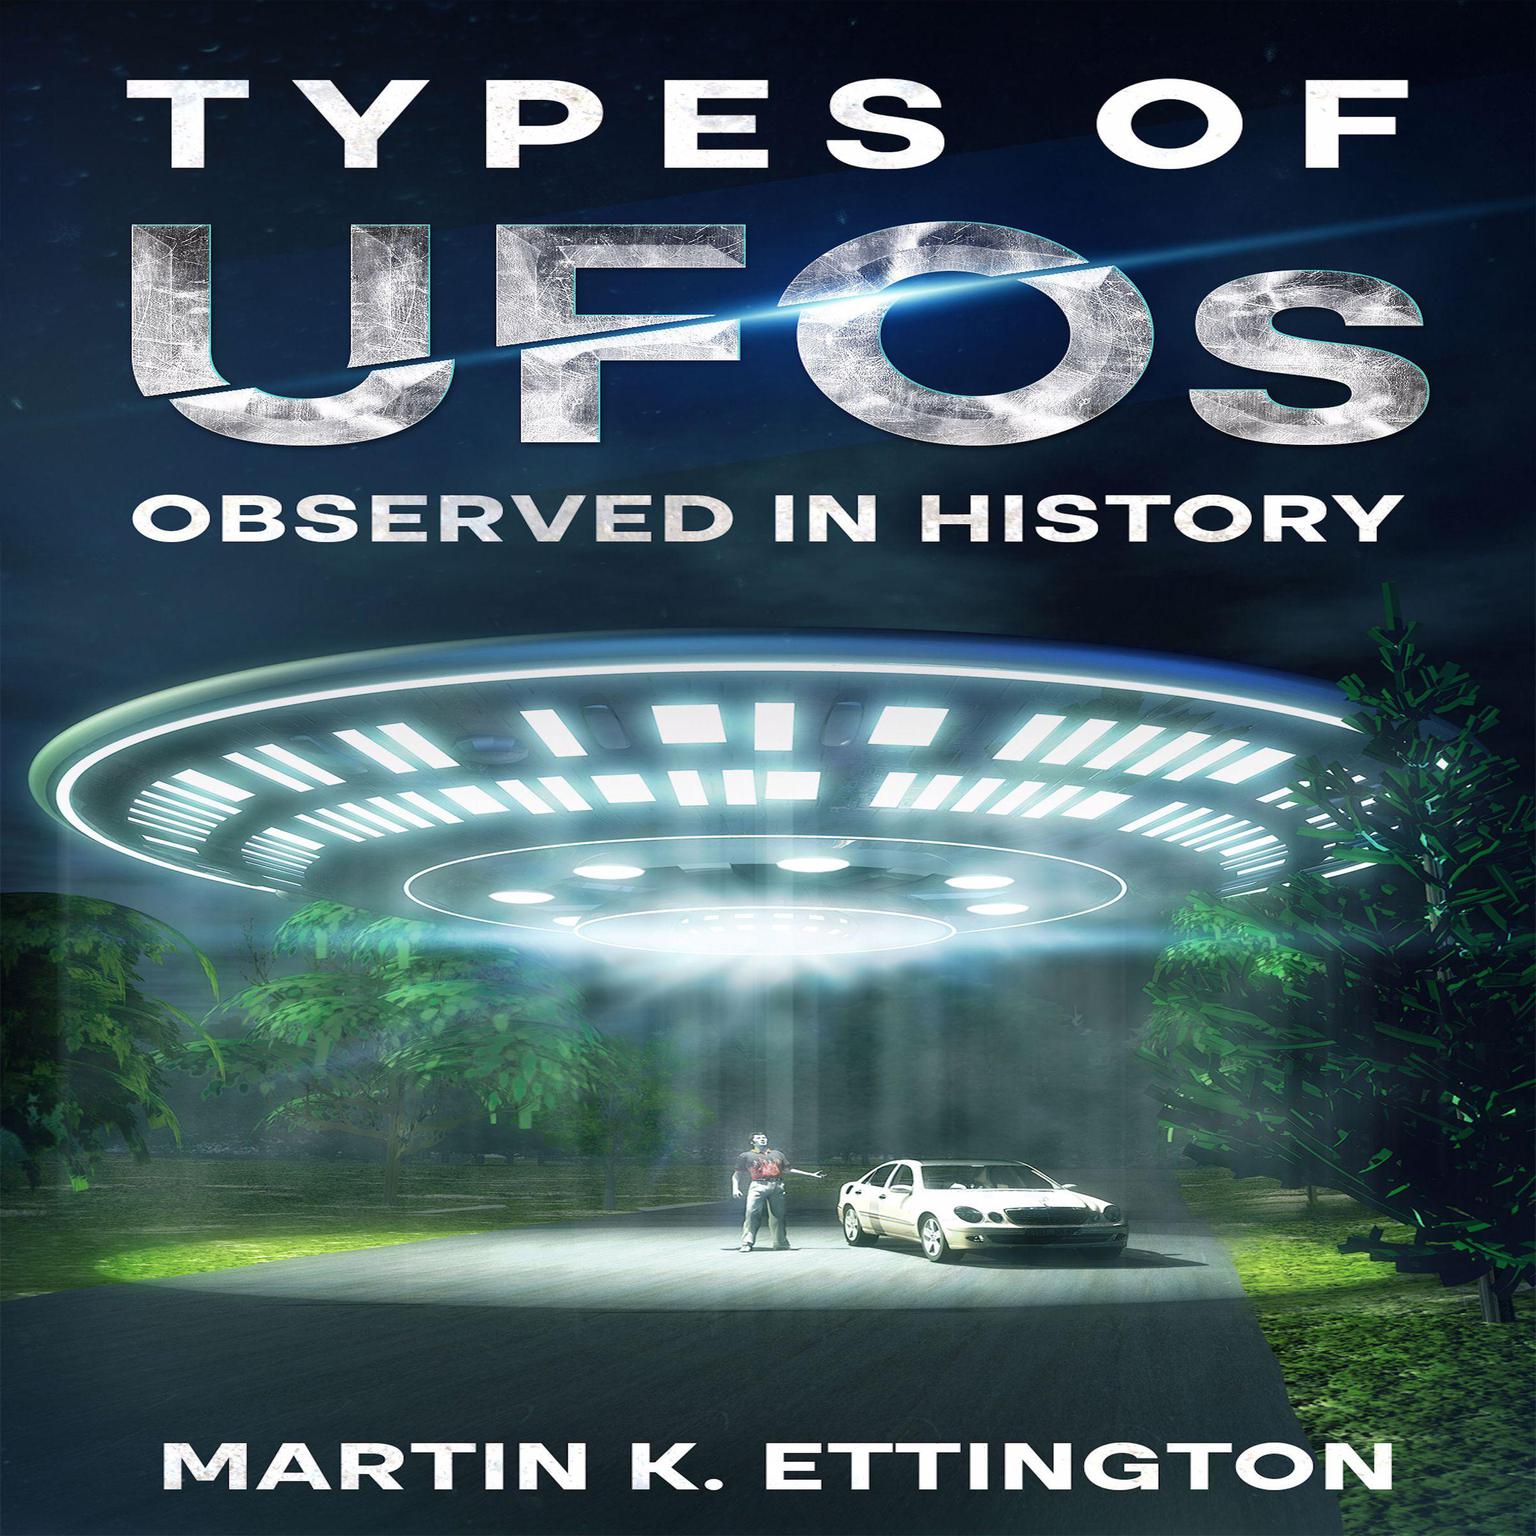 Types of UFOs Observed in History Audiobook, by Martin K. Ettington